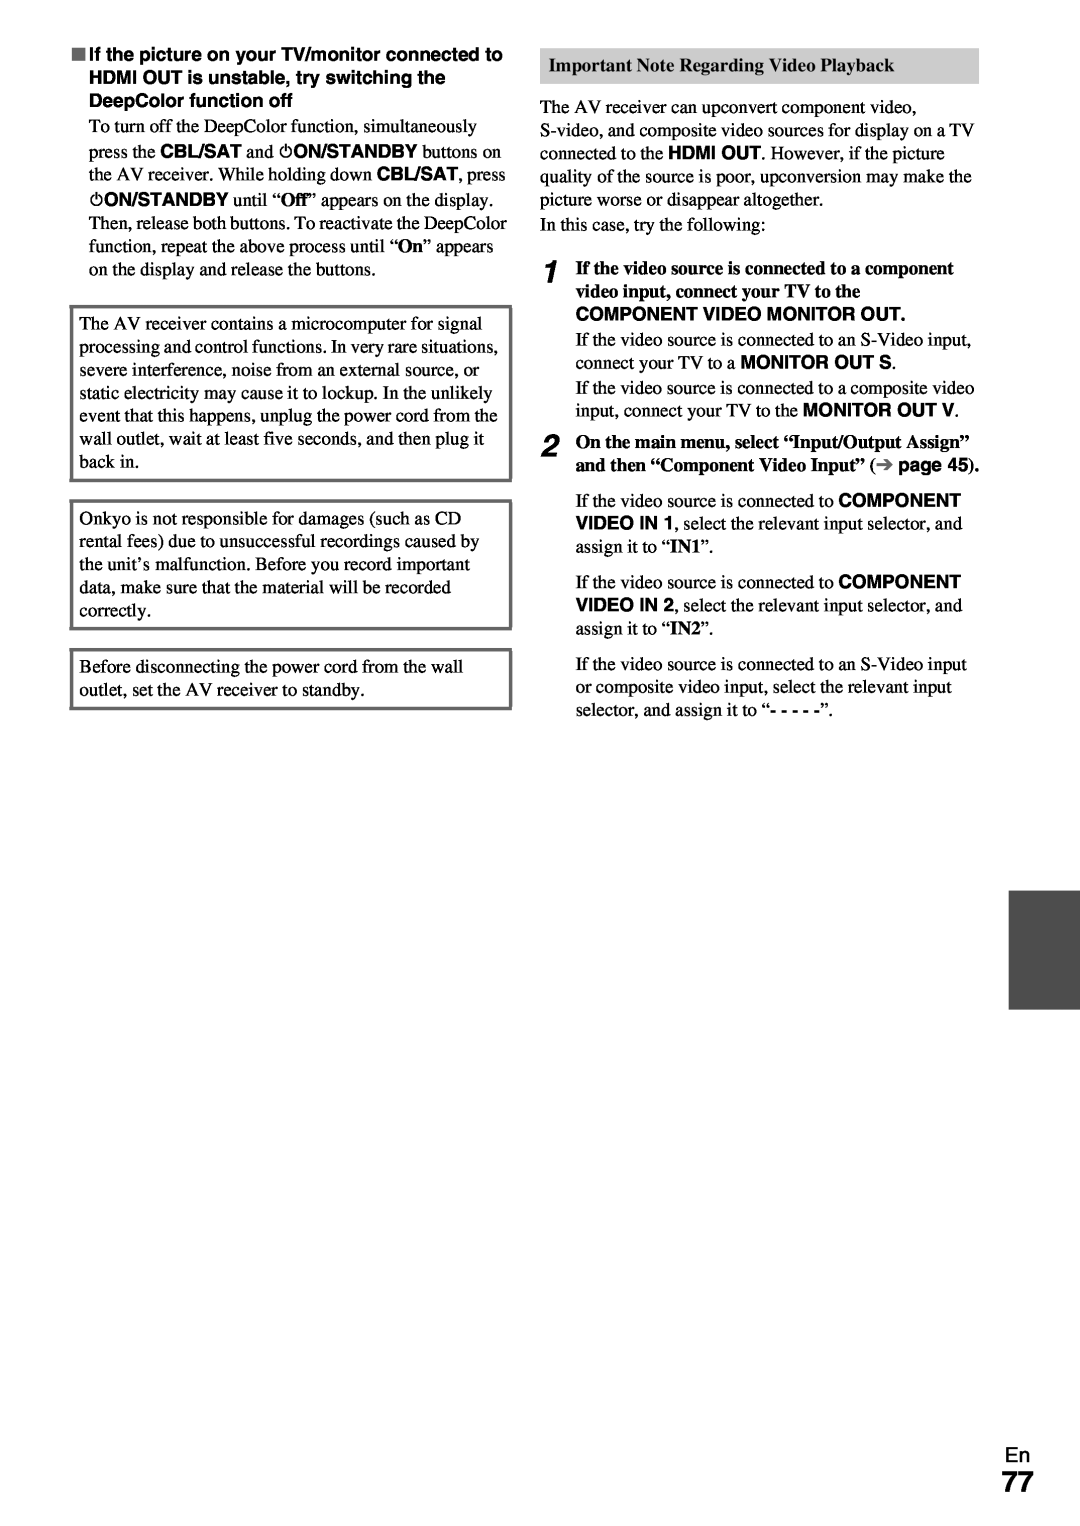 Onkyo HT-RC370 instruction manual Important Note Regarding Video Playback, Component Video Monitor Out 